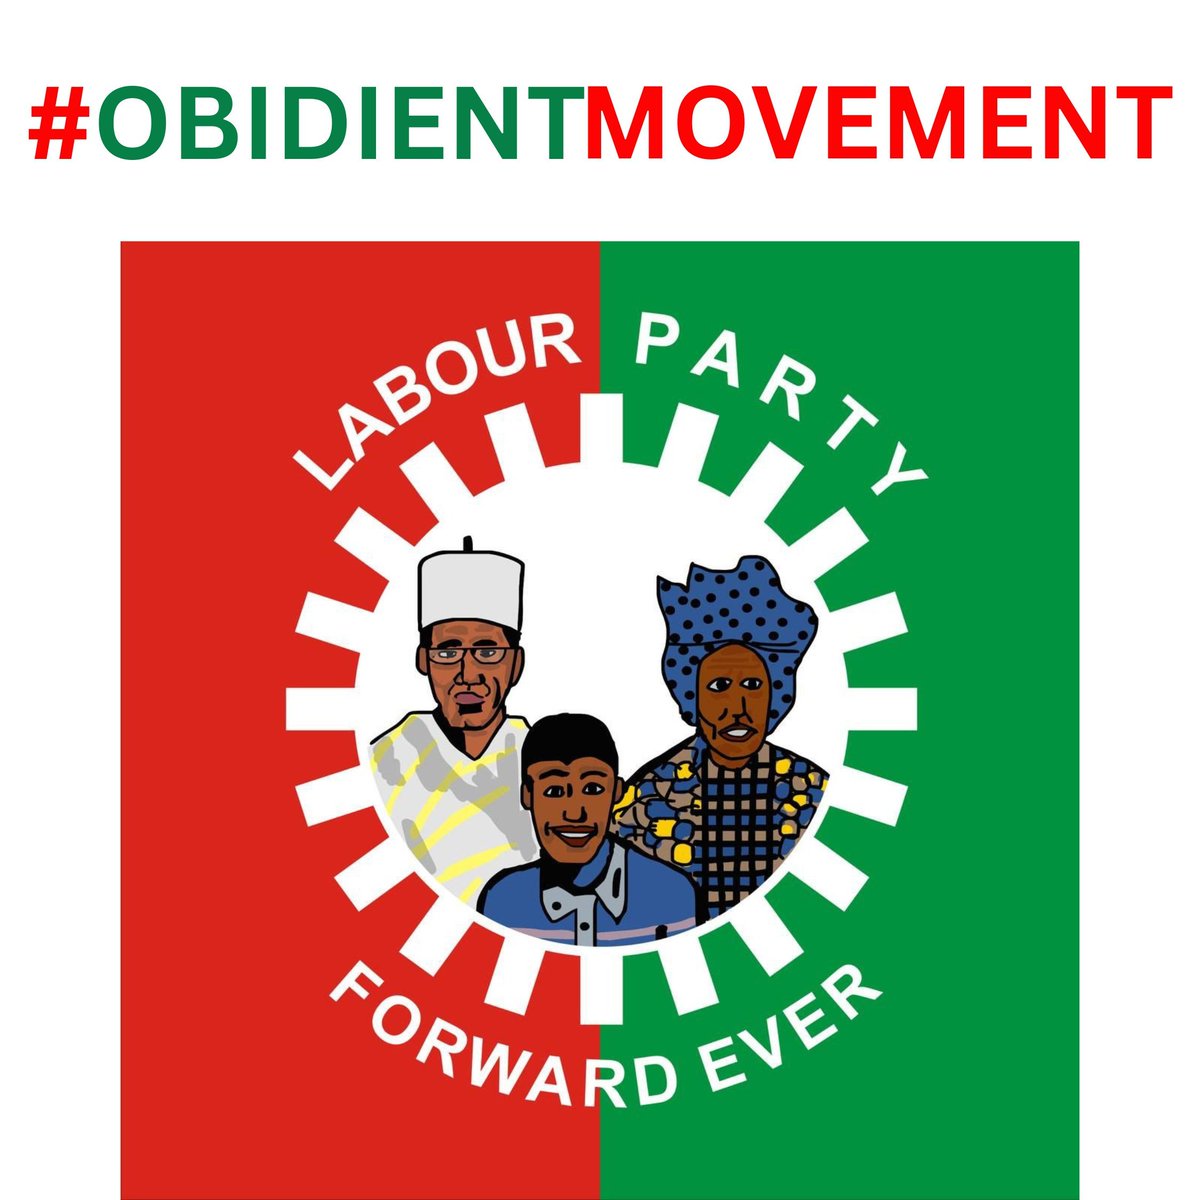 Vote: Labour Party (LP) ✅ from top to bottom. Vote: Mama, Papa, Pikin

LET'S BE GUIDED:
Come March 18, 2023 on no ground should PDP or APC candidates be gifted a vote by any #obidient for any elective position without an LP candidate. 

#GRVforLagos
#KudabankSca
#OccupyINECNOW